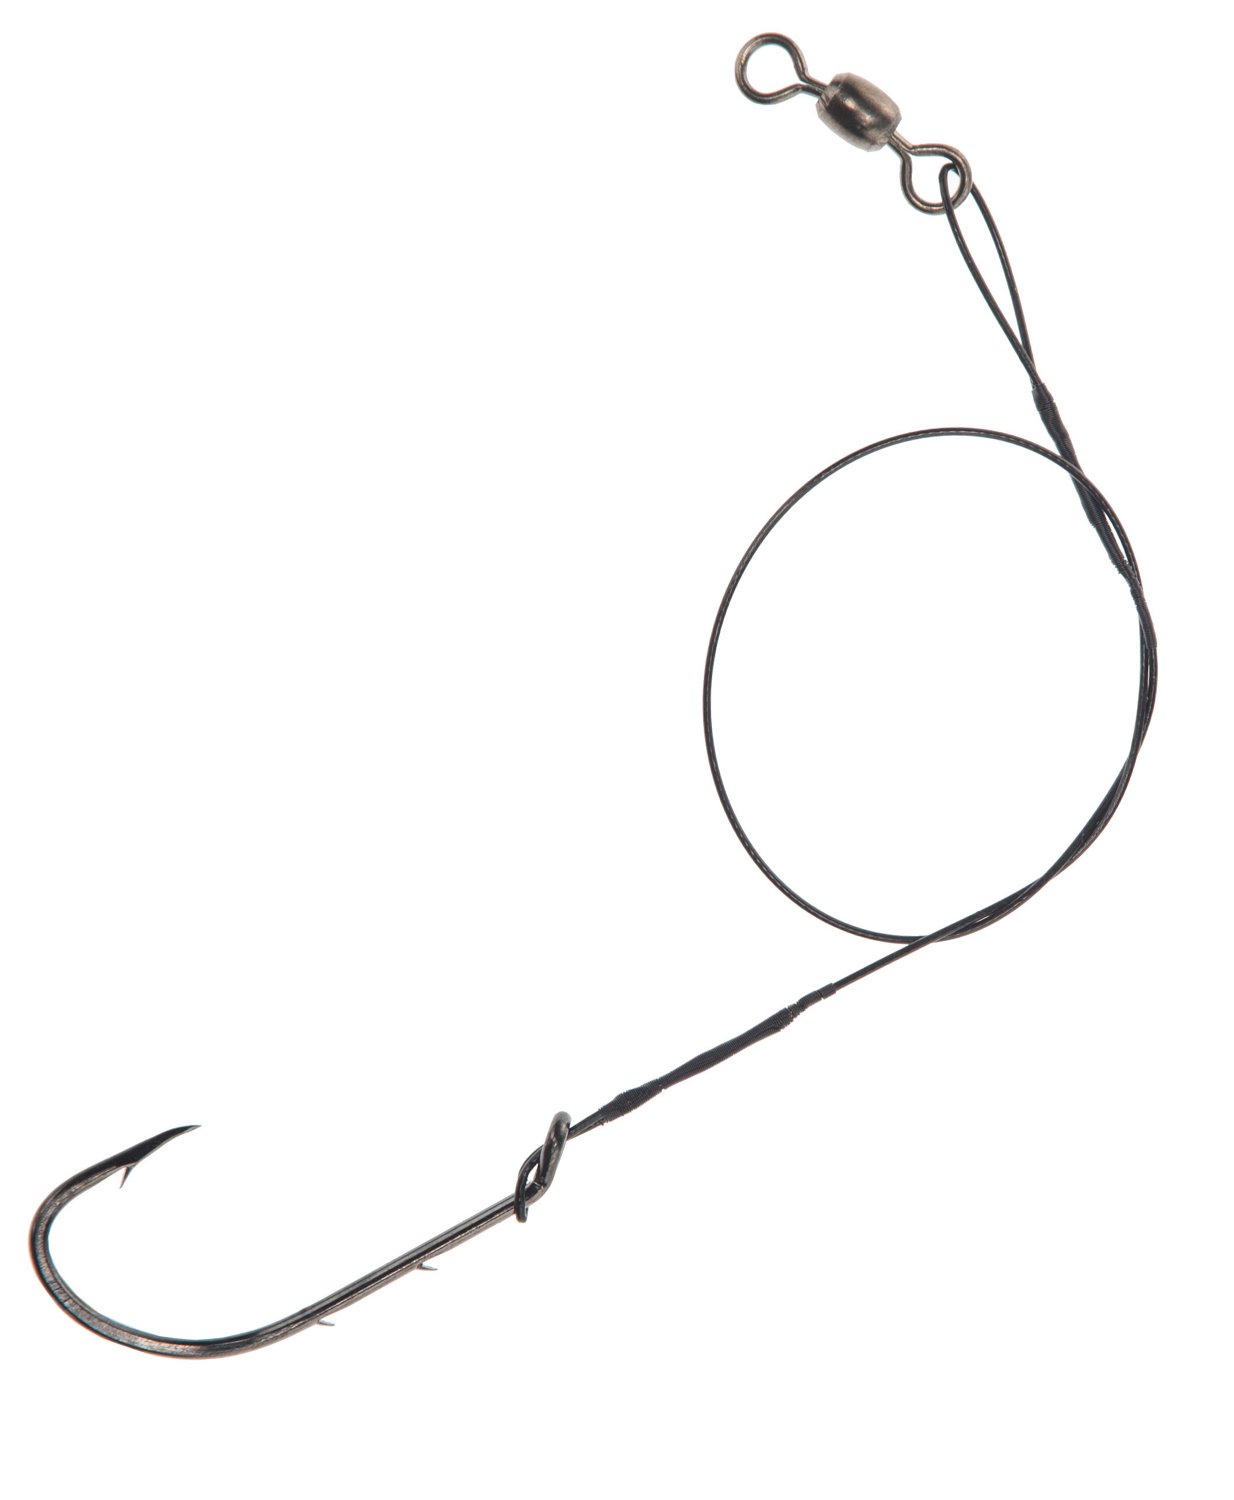 Eagle Claw Lazer Sharp Saltwater Snelled Nylawire Single Hooks 5-Pack